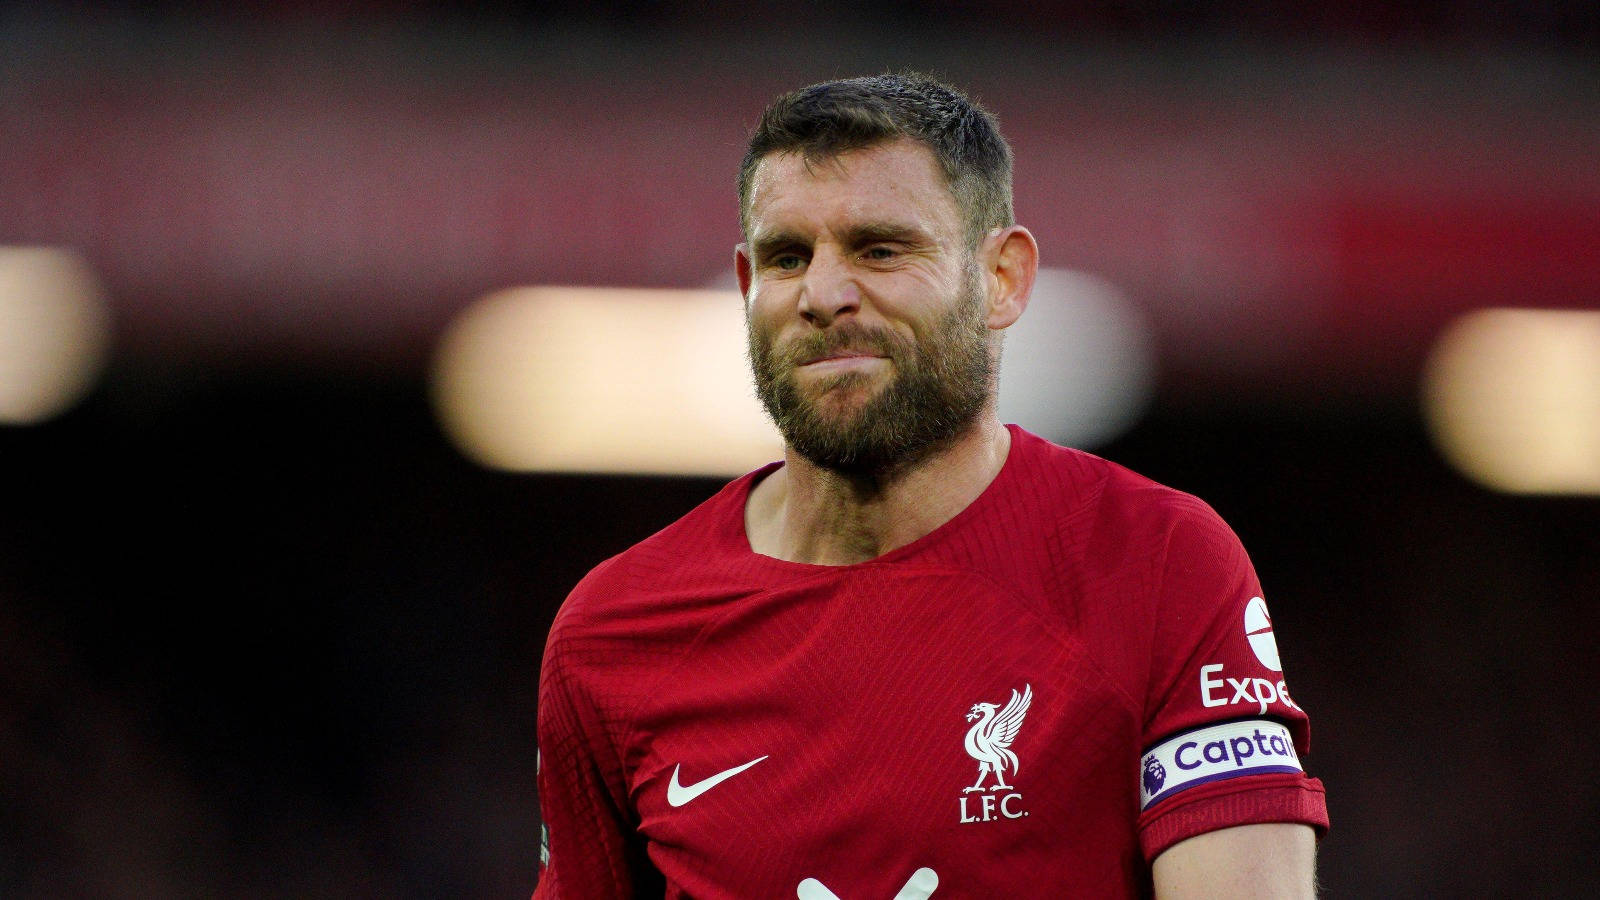 James Milner Looking Disappointed Wallpaper